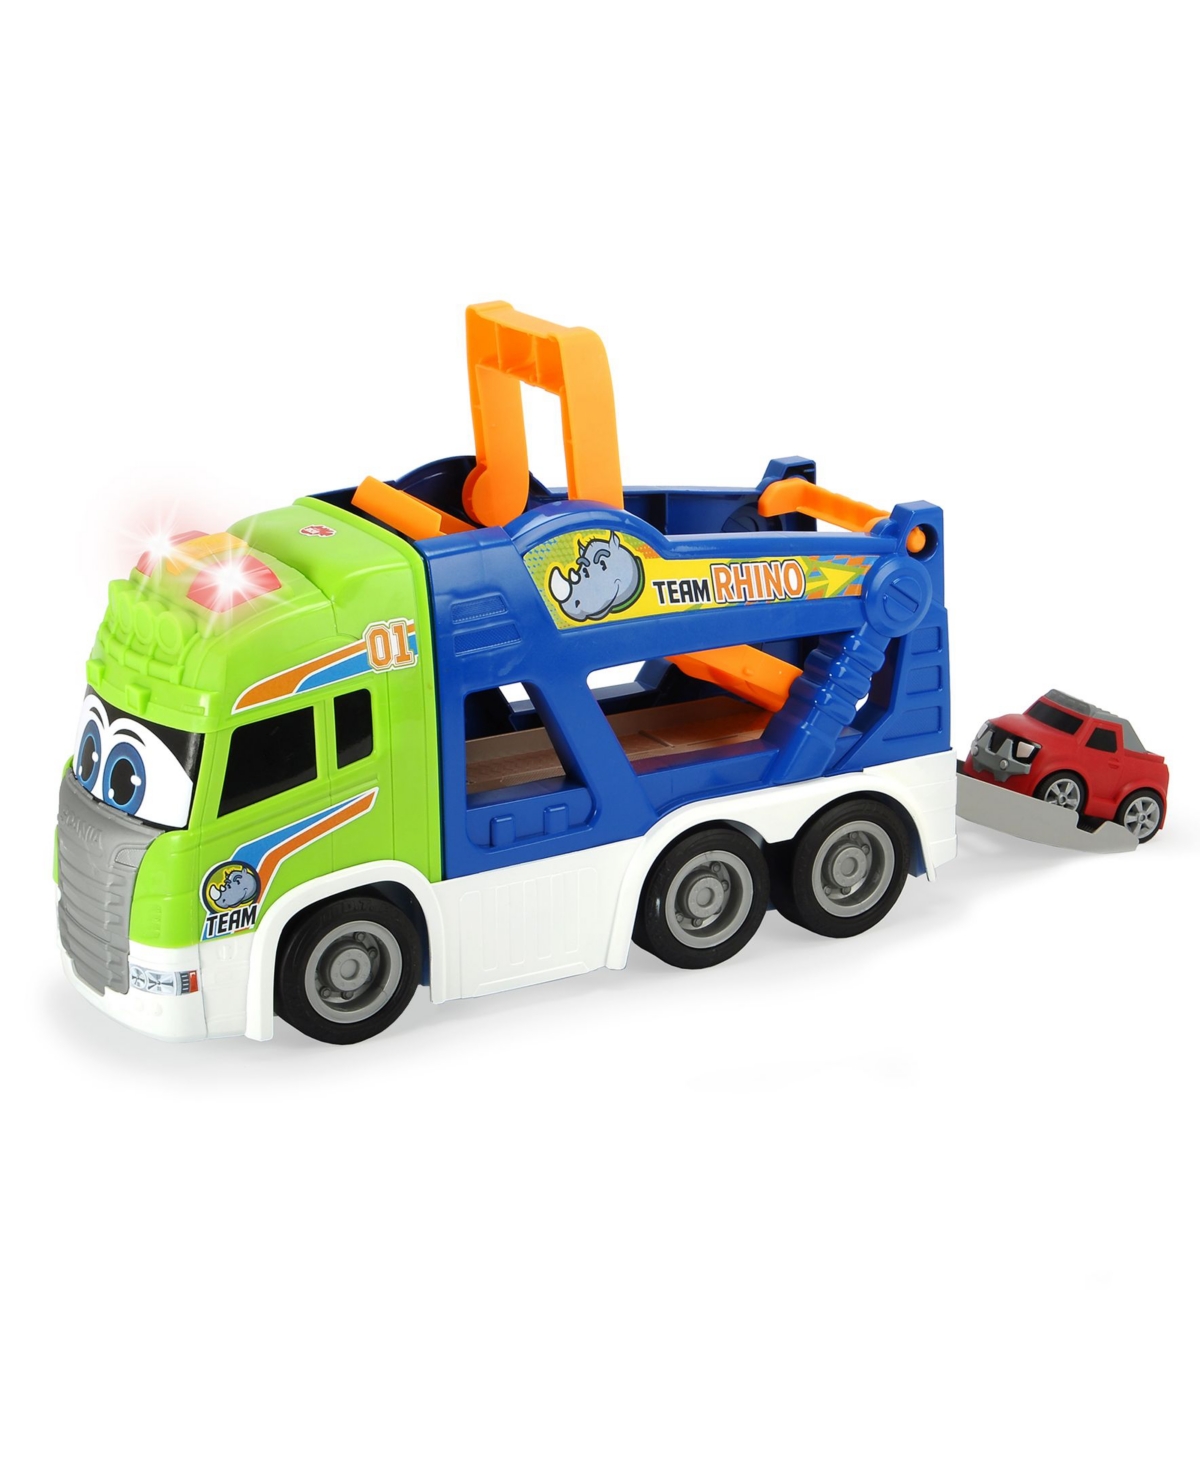 Dickie Toys Hk Ltd - 16" Happy Scania Car Transporter Pre-school Vehicle With Extra Car In Multi